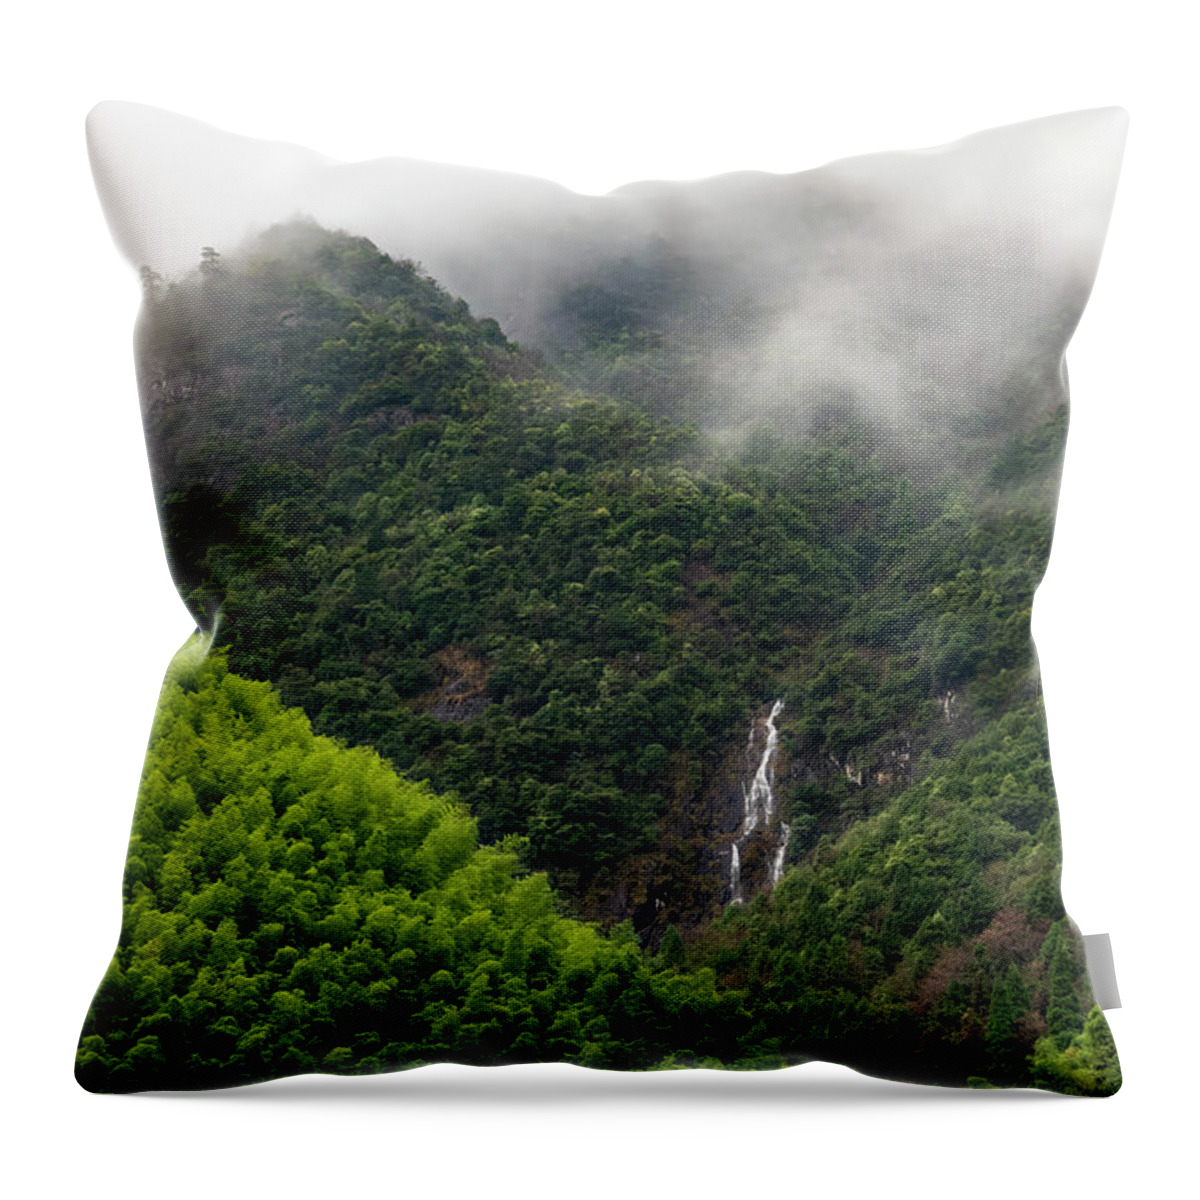 Waterfall Throw Pillow featuring the photograph Misty Mountain Waterfall by William Dickman